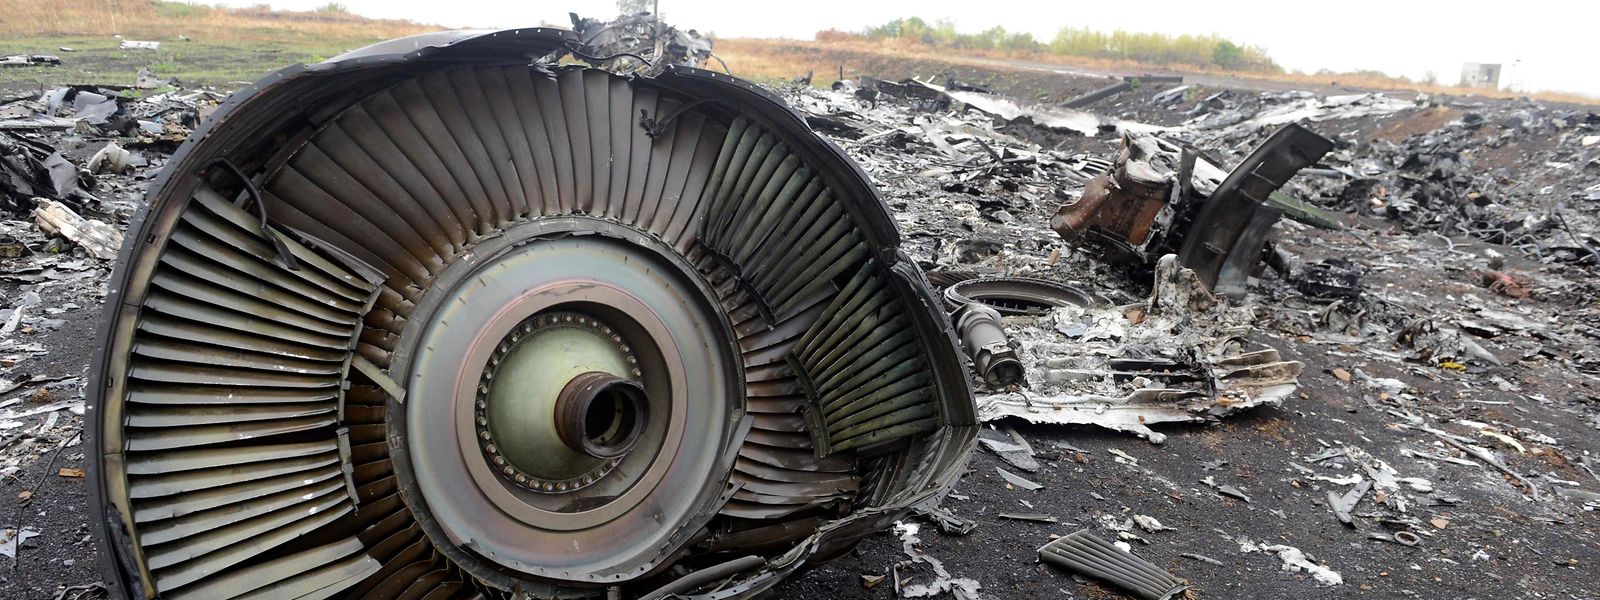 Wrackteile des Malaysia Airlines Fluges MH17.